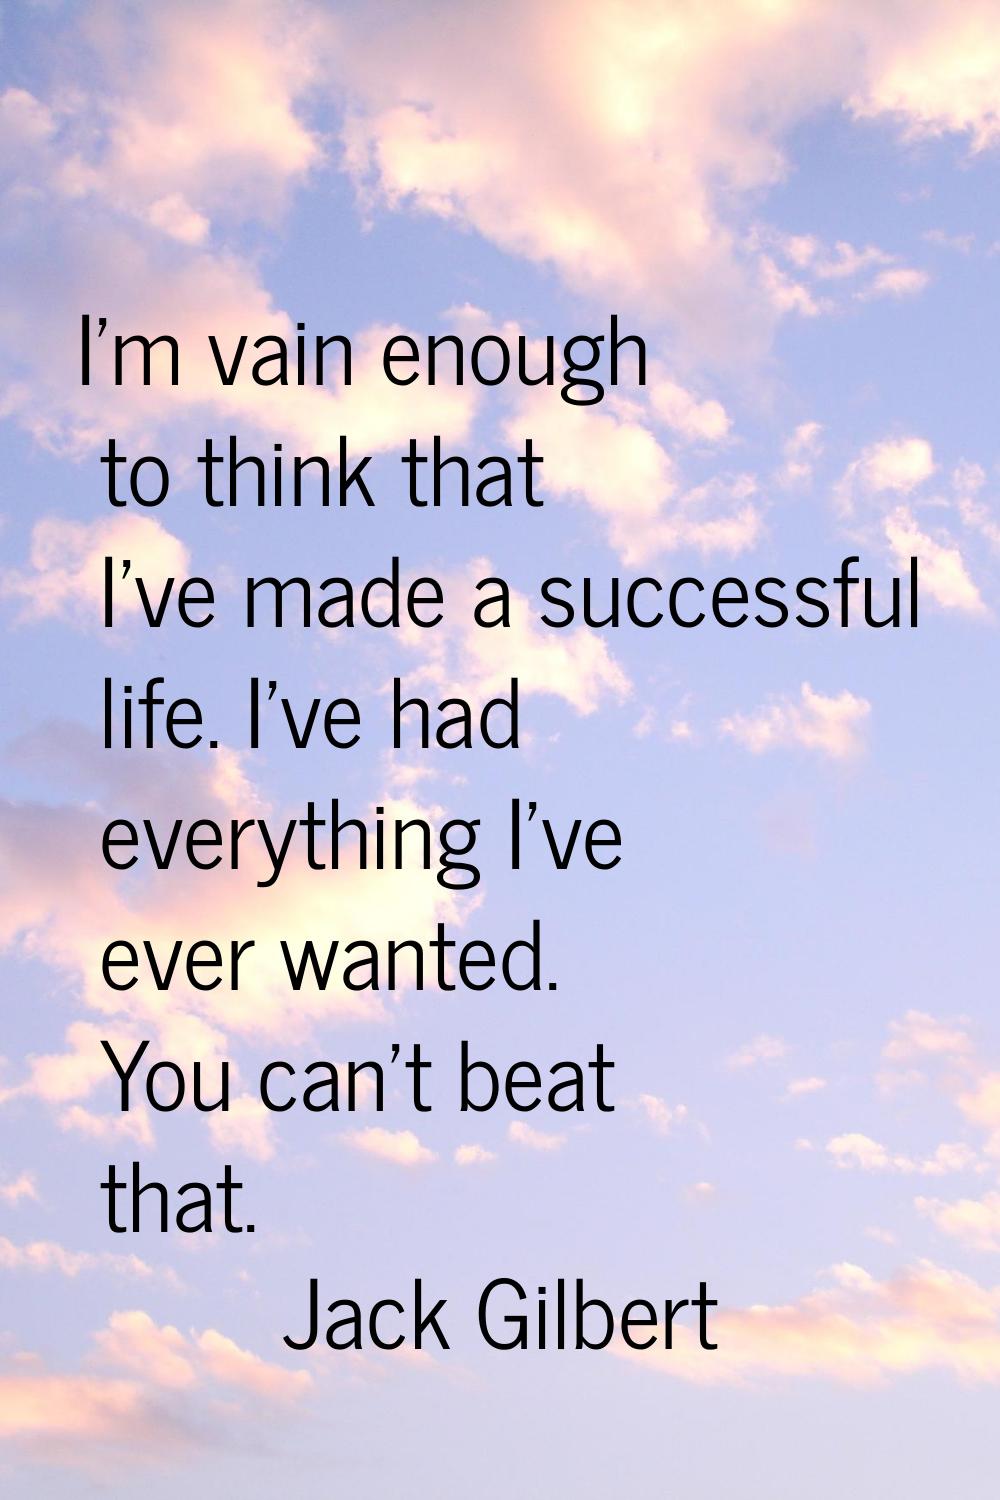 I'm vain enough to think that I've made a successful life. I've had everything I've ever wanted. Yo